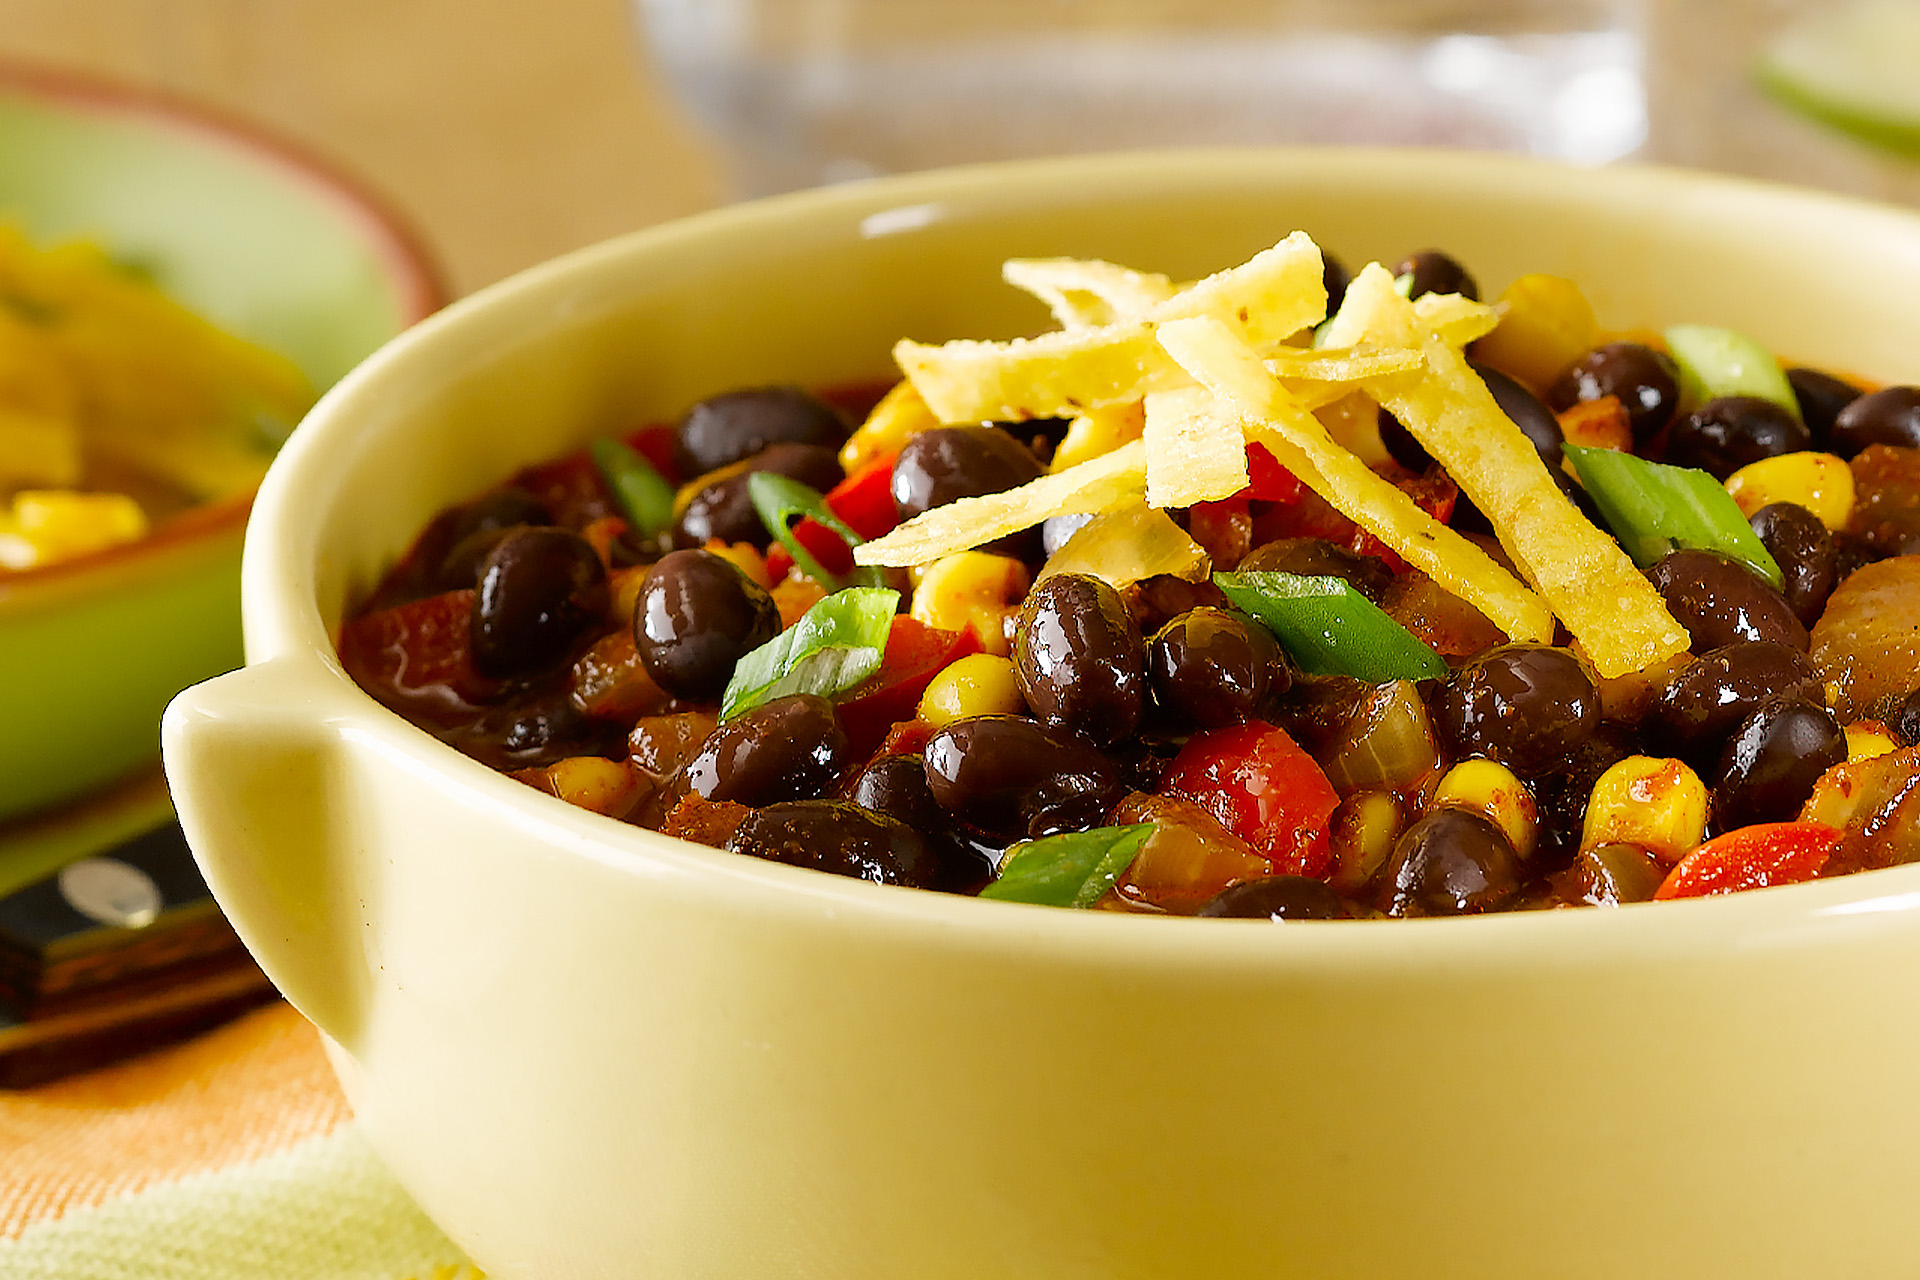 Black bean chili topped with tortilla strips in a pale green bowl